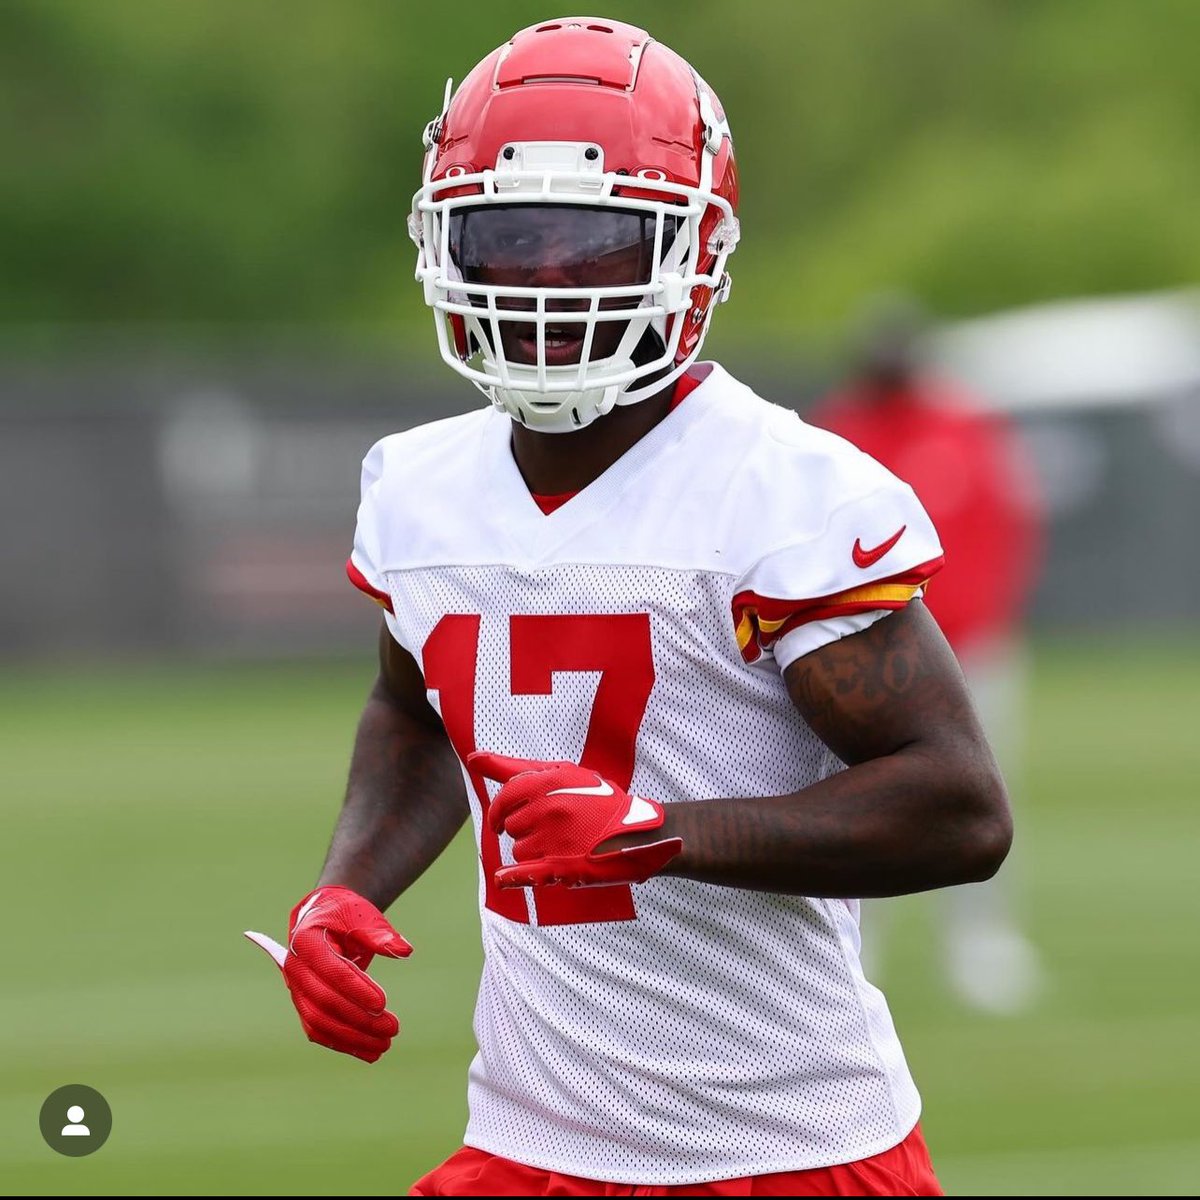 Former (@DreamU_IndyFB and @Vol_Football) JUCO DB @KamalHadden5 at #Chiefs Rookie Mini Camp #JUCOPRODUCT